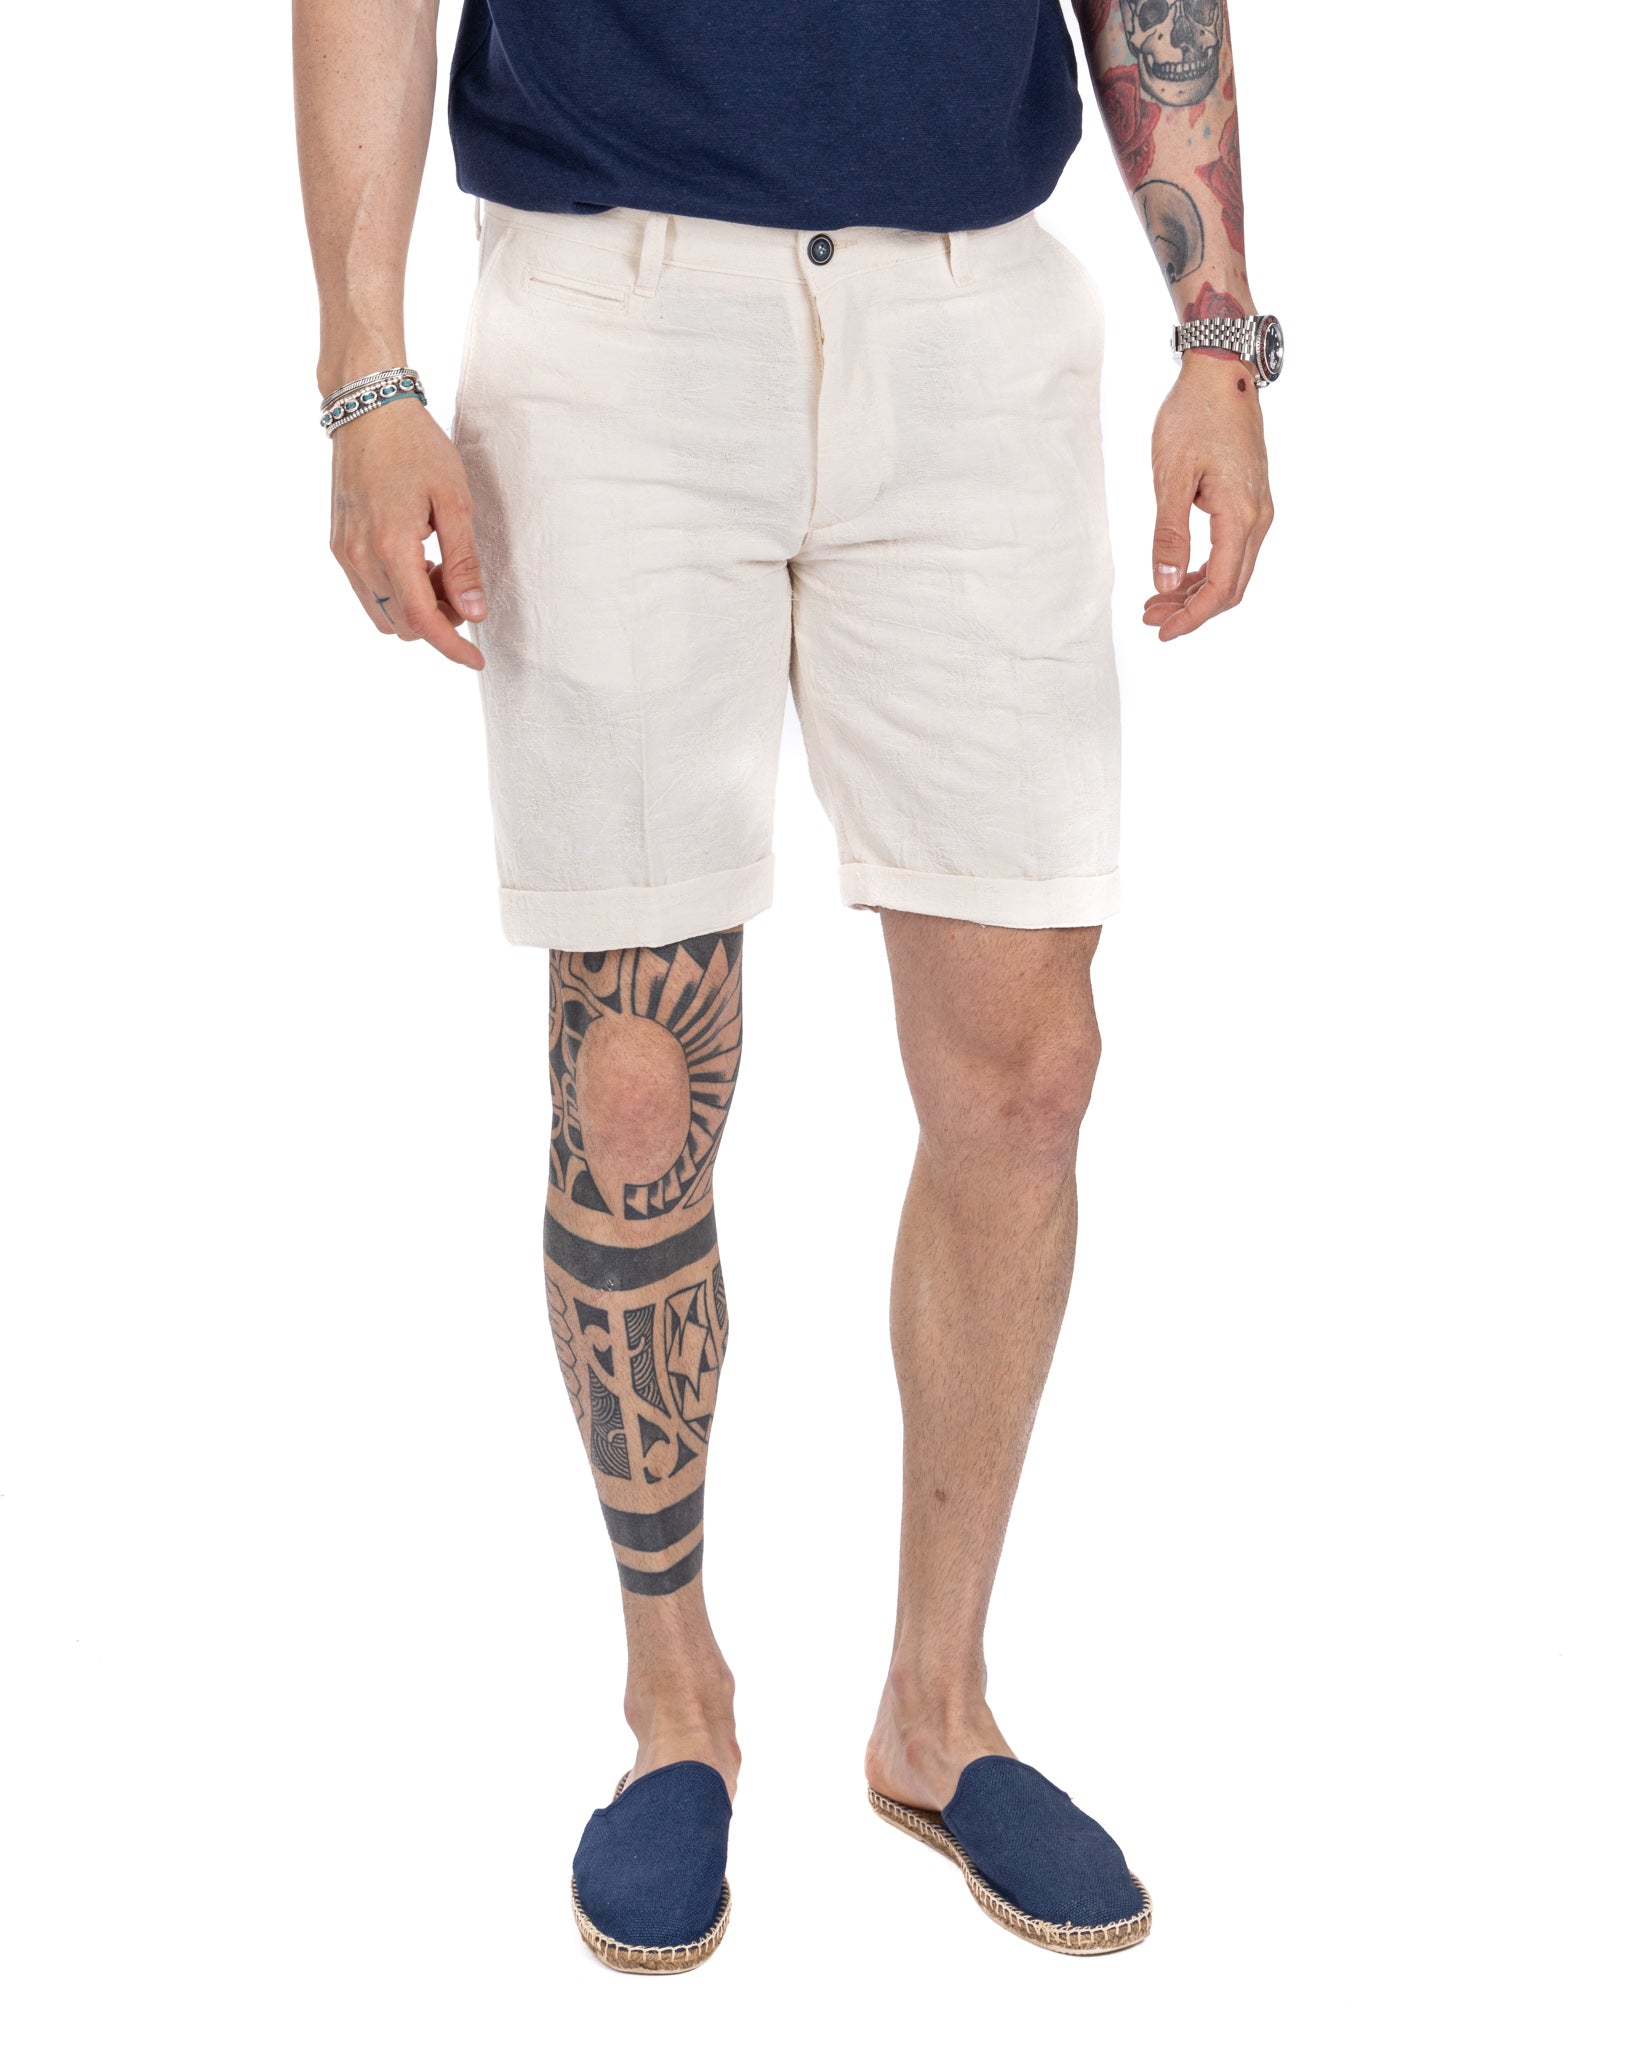 Bahama - white Bermuda shorts with relief pattern